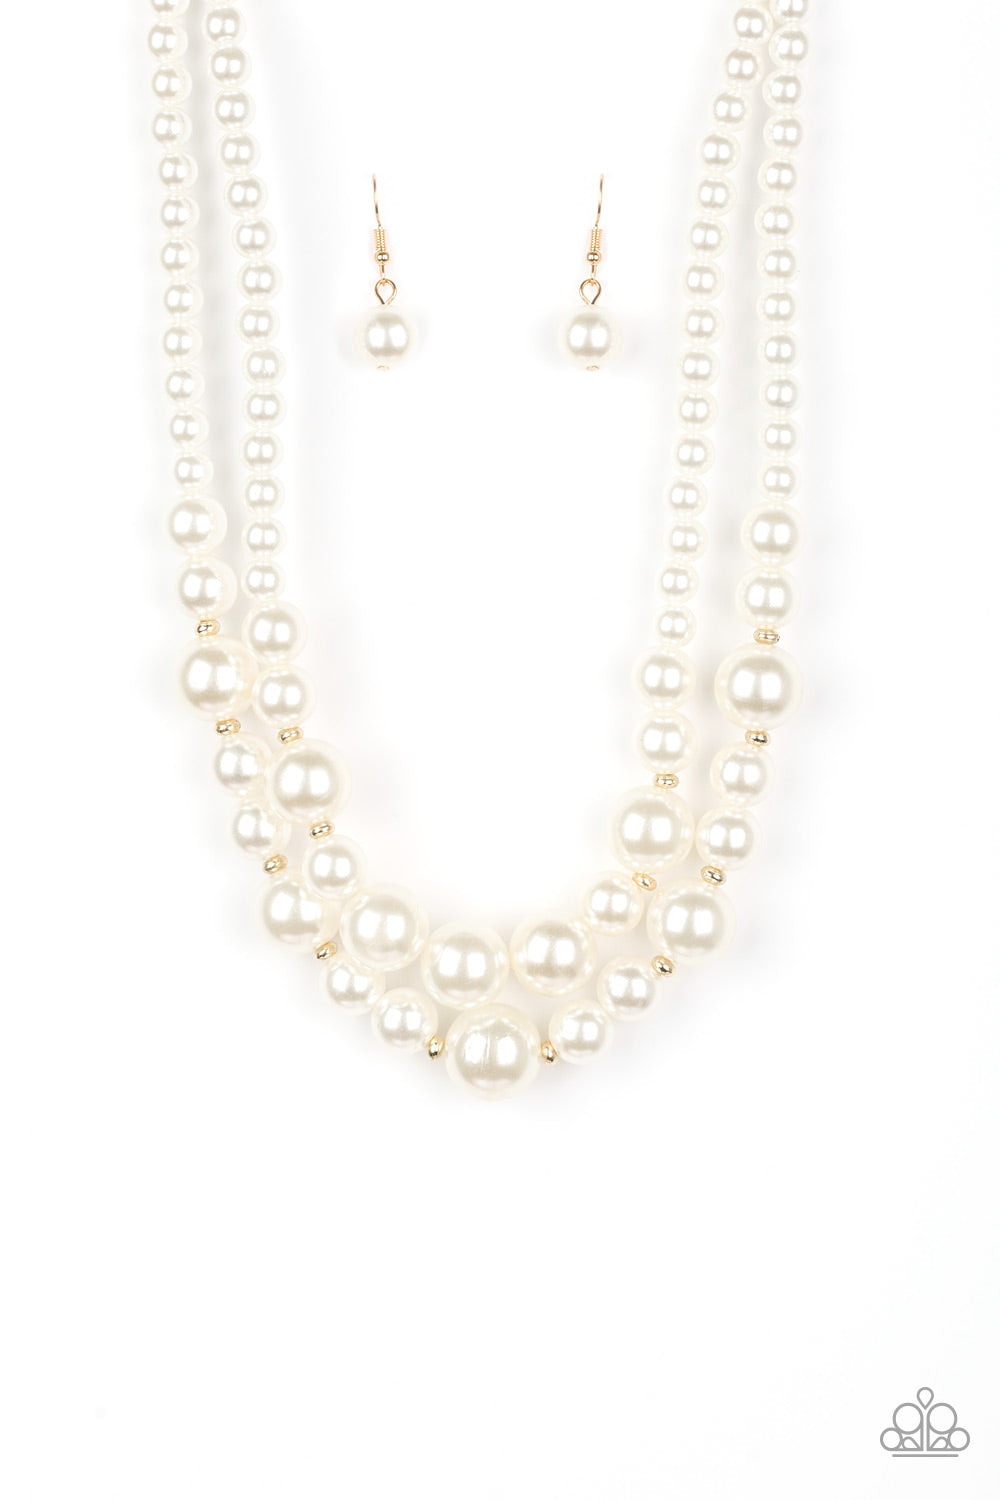 The More The Modest - Gold Pearl Necklace - Paparazzi Accessories